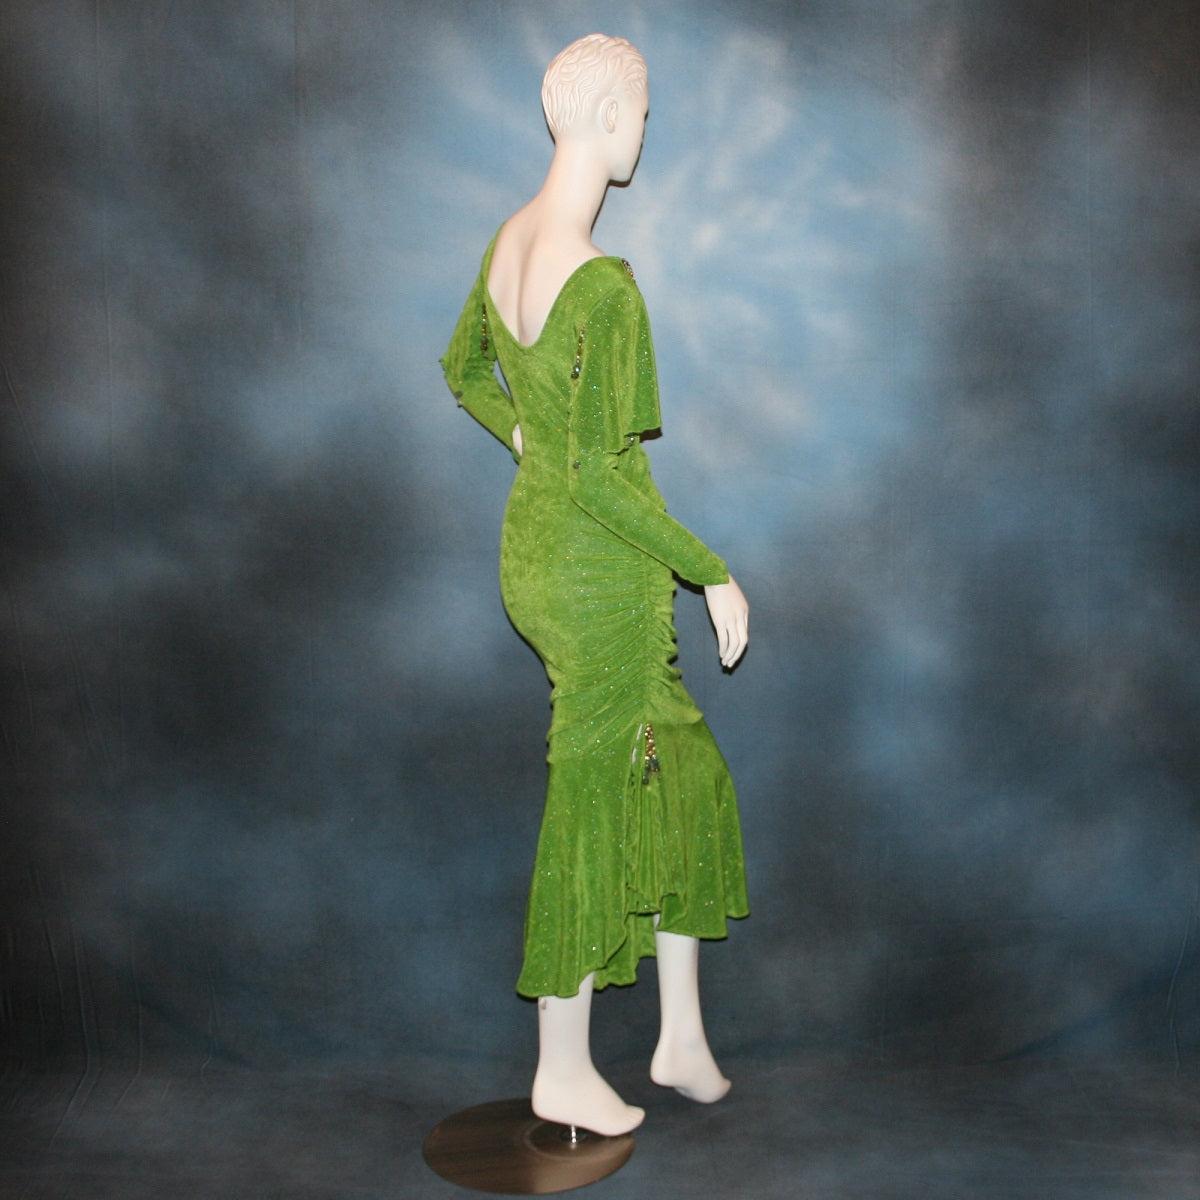 side view of Apple green social Latin/rhythm dress was created of apple green glitter slinky, features ruching on the right side, long sleeves, scoop back, & full skirting with open side that has Swarovski hand beaded detail